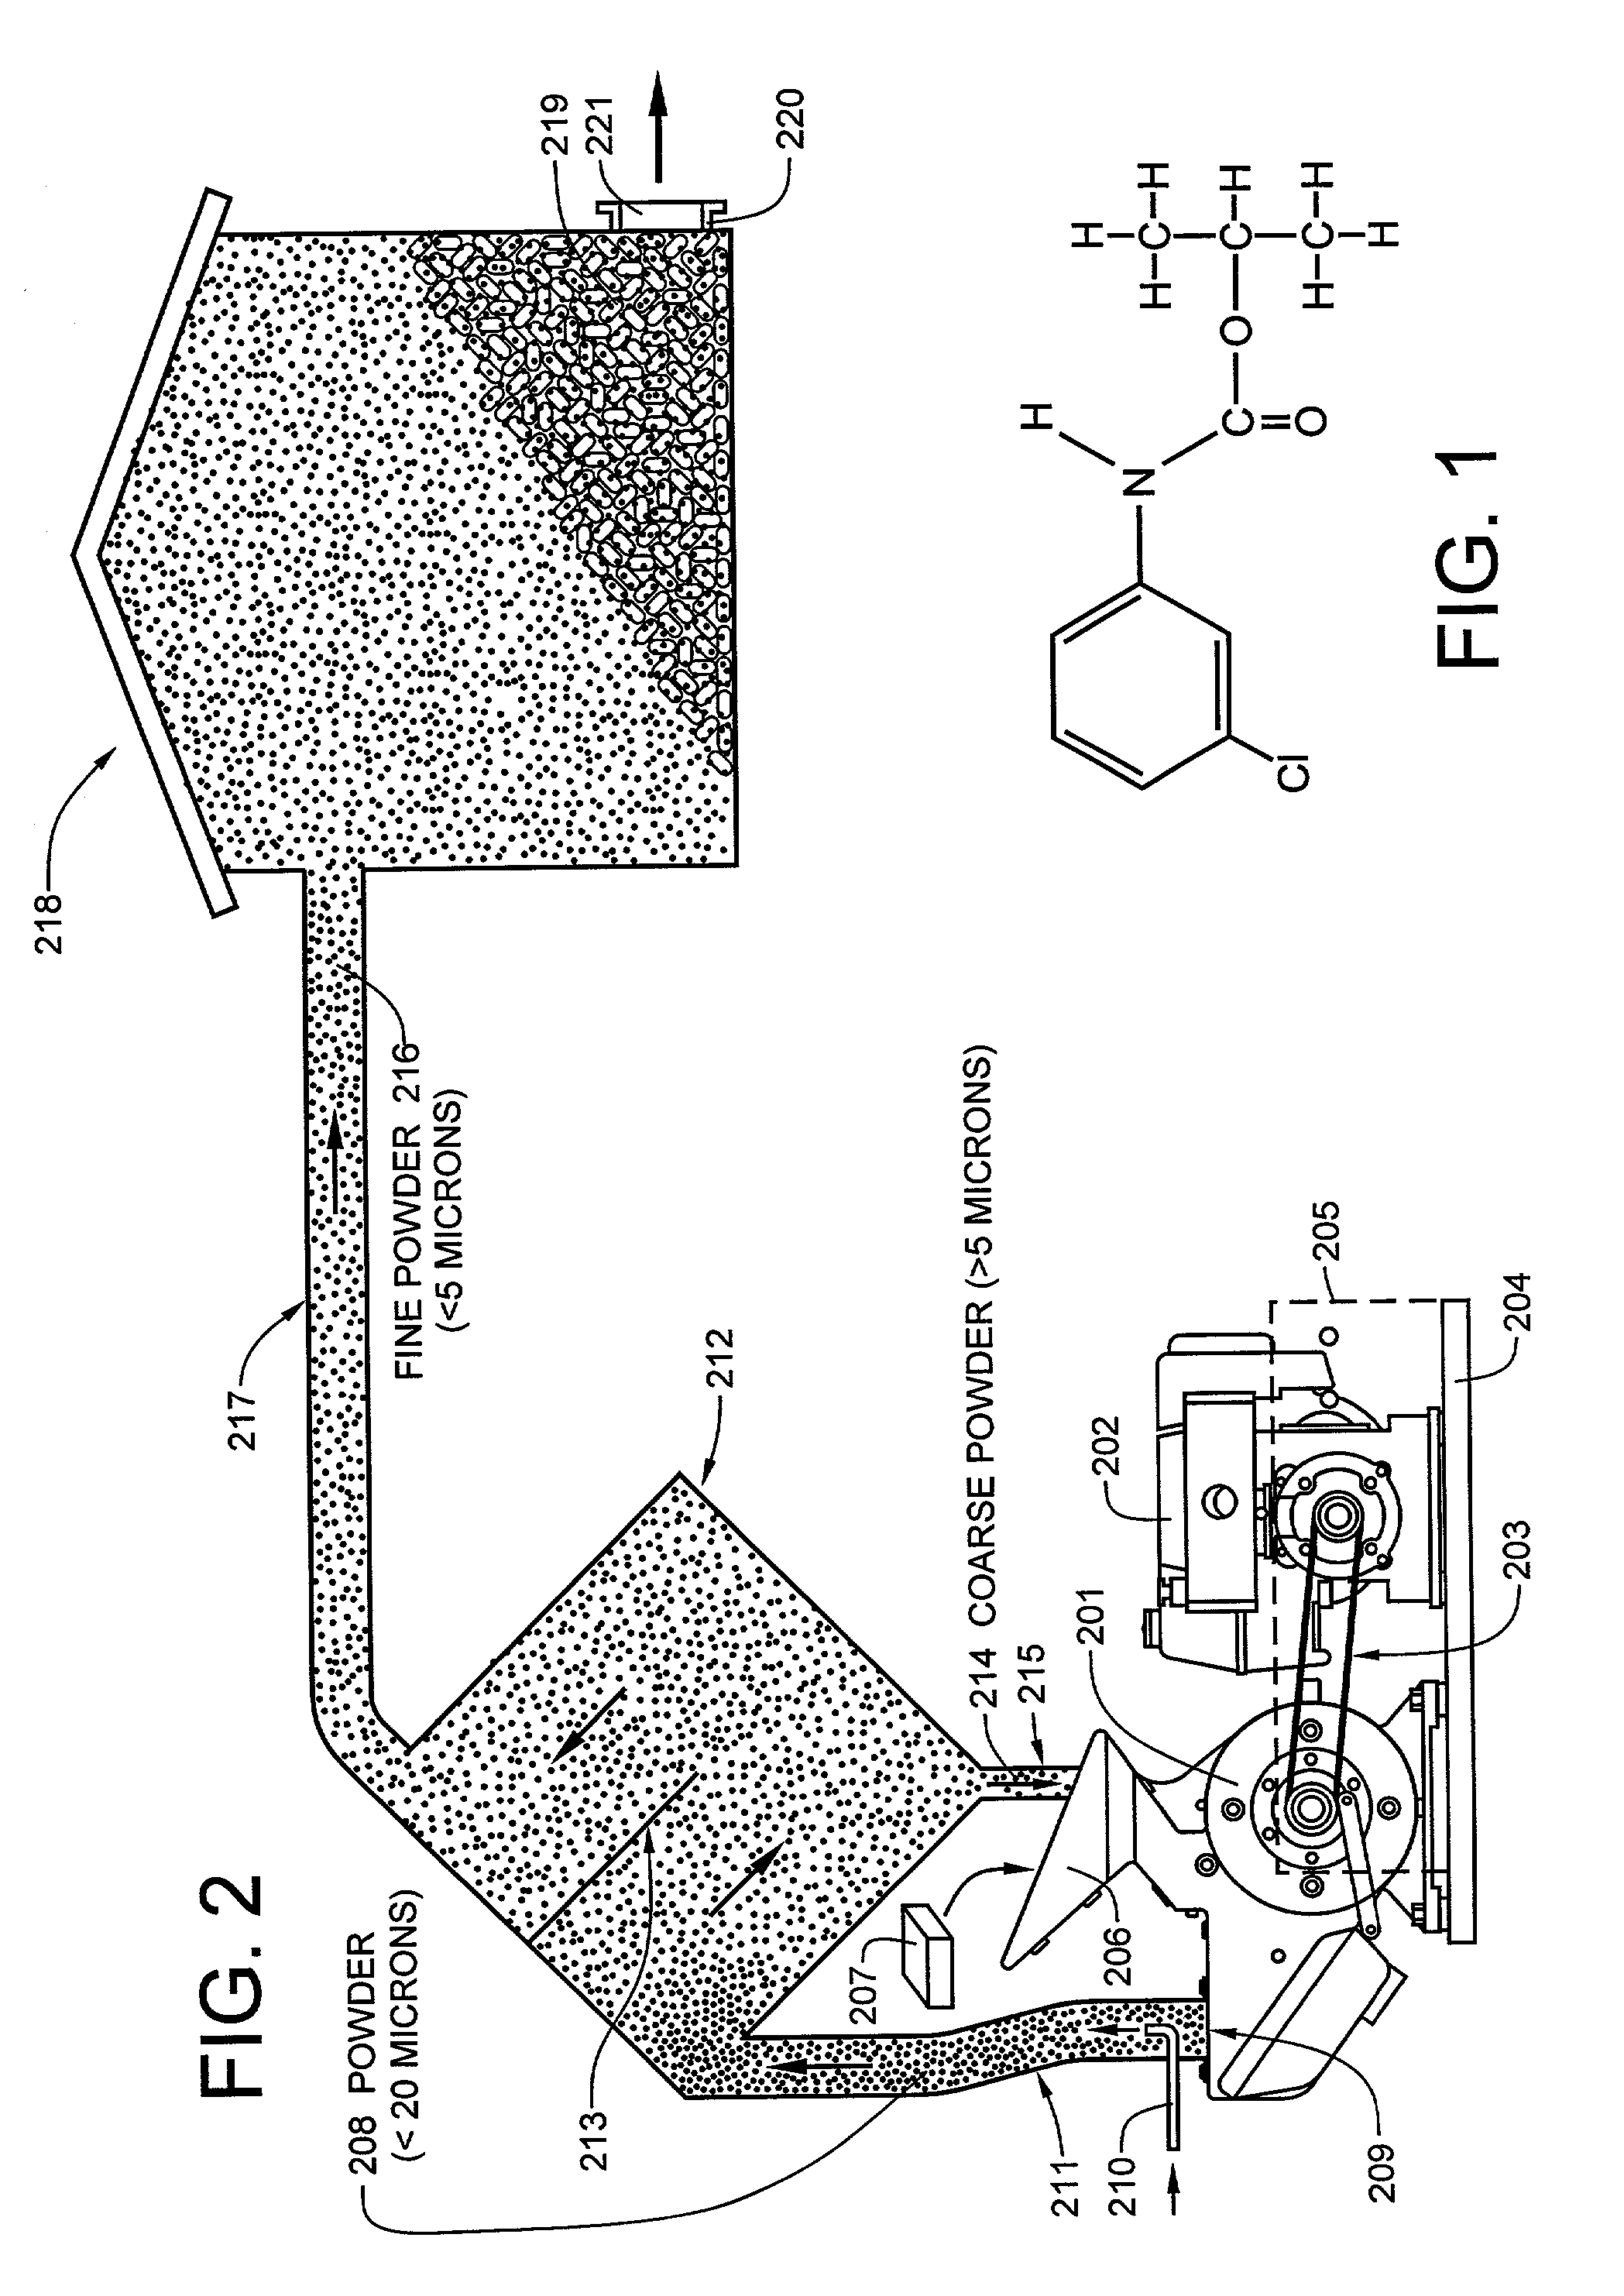 Method and apparatus for treating tubers with a powdered organic compound